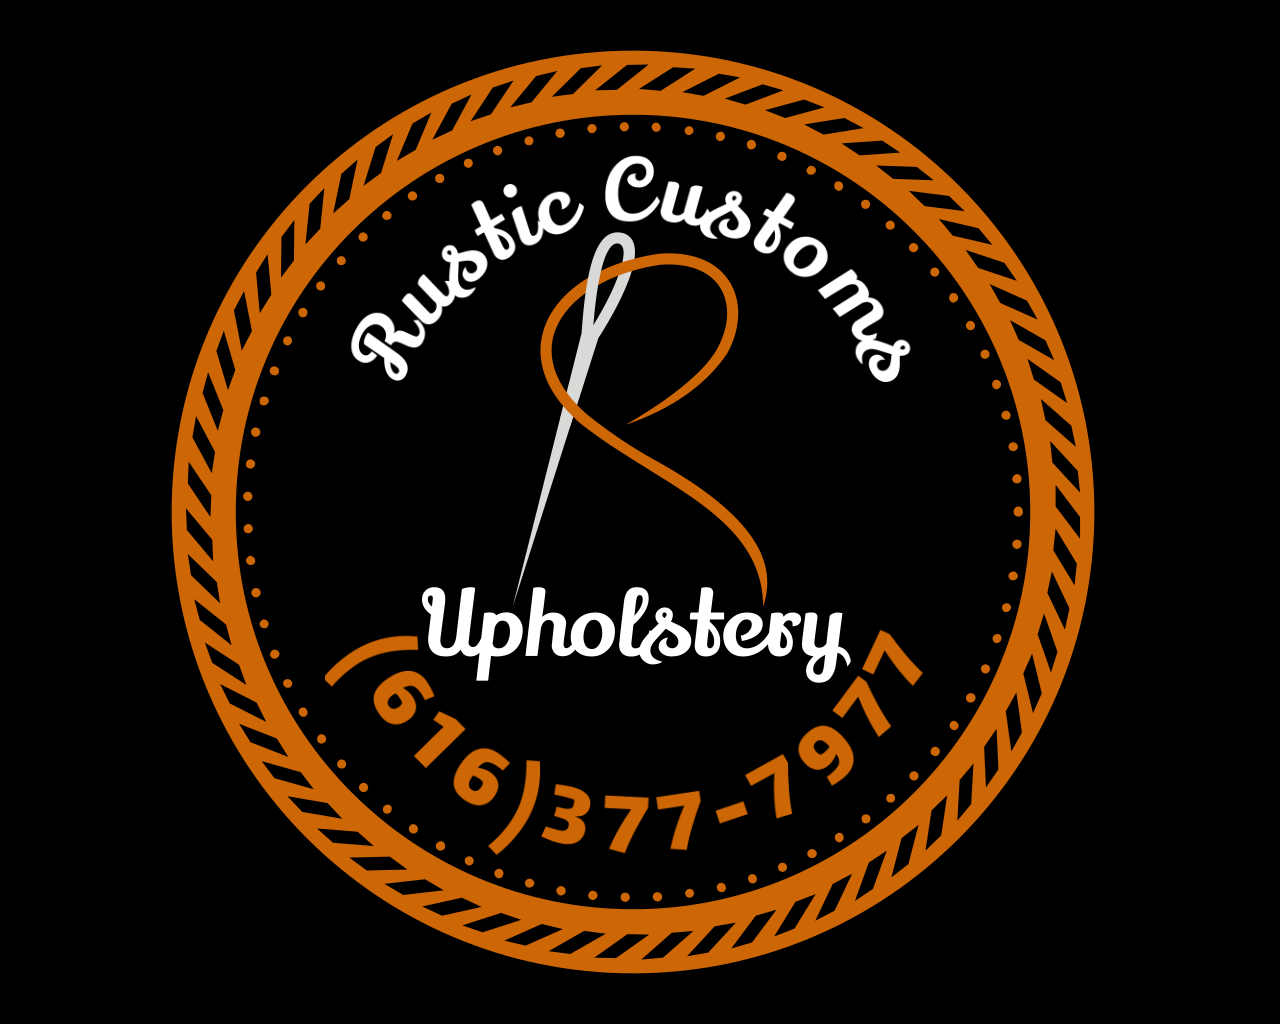 Rustic Customs Upholstery